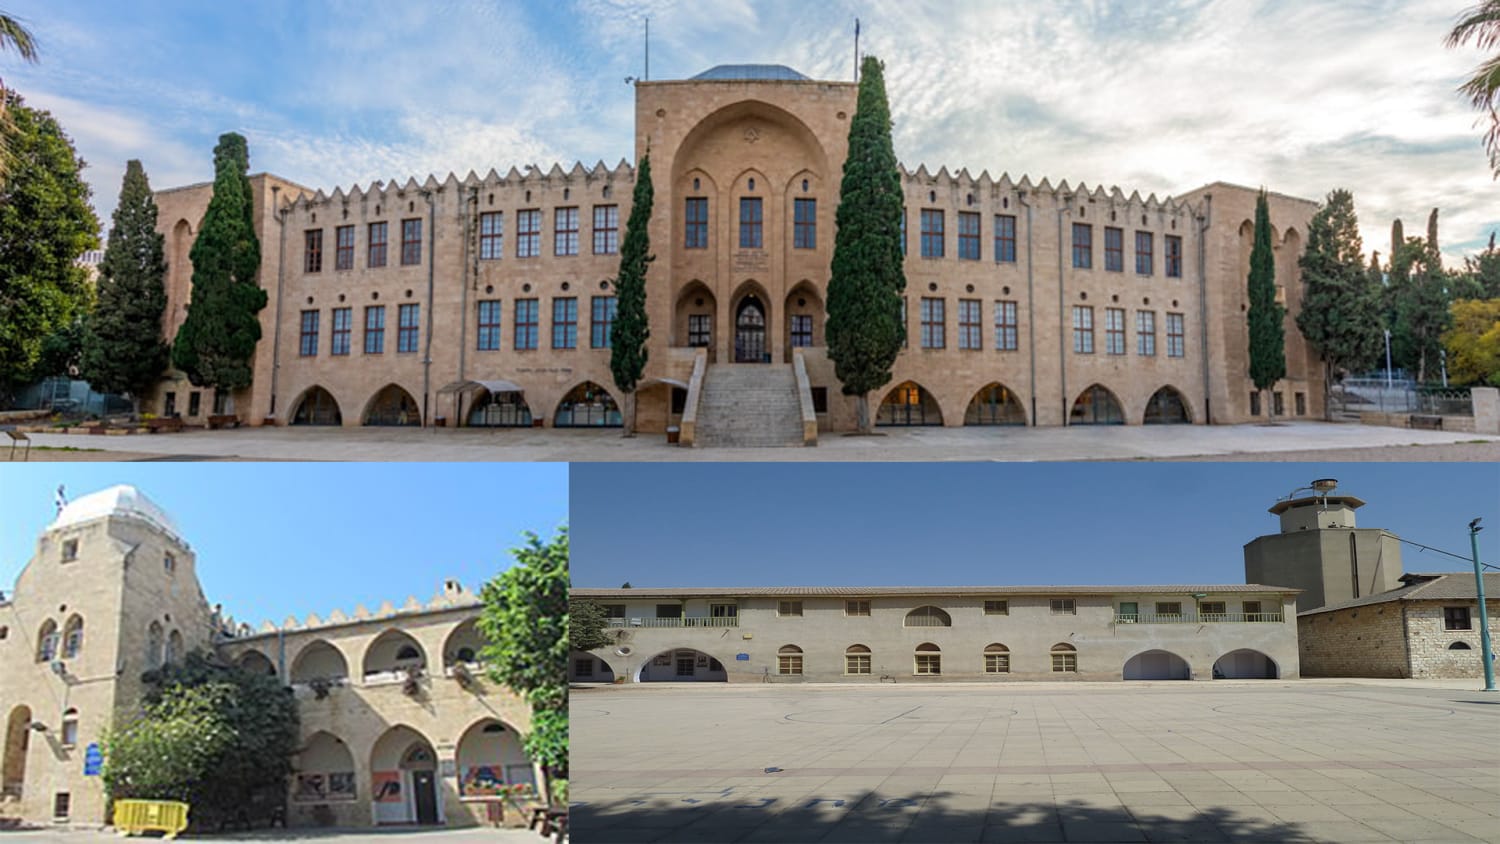 Buildings of the Eretz-Israel style. Jewish settlers in Ottoman Palestine tried to create a new distinct architecture by mixing native Arab and some European features (rest in comments). The buildings from left to right are: The national science museum, Hebrew Reali School and Merhavia